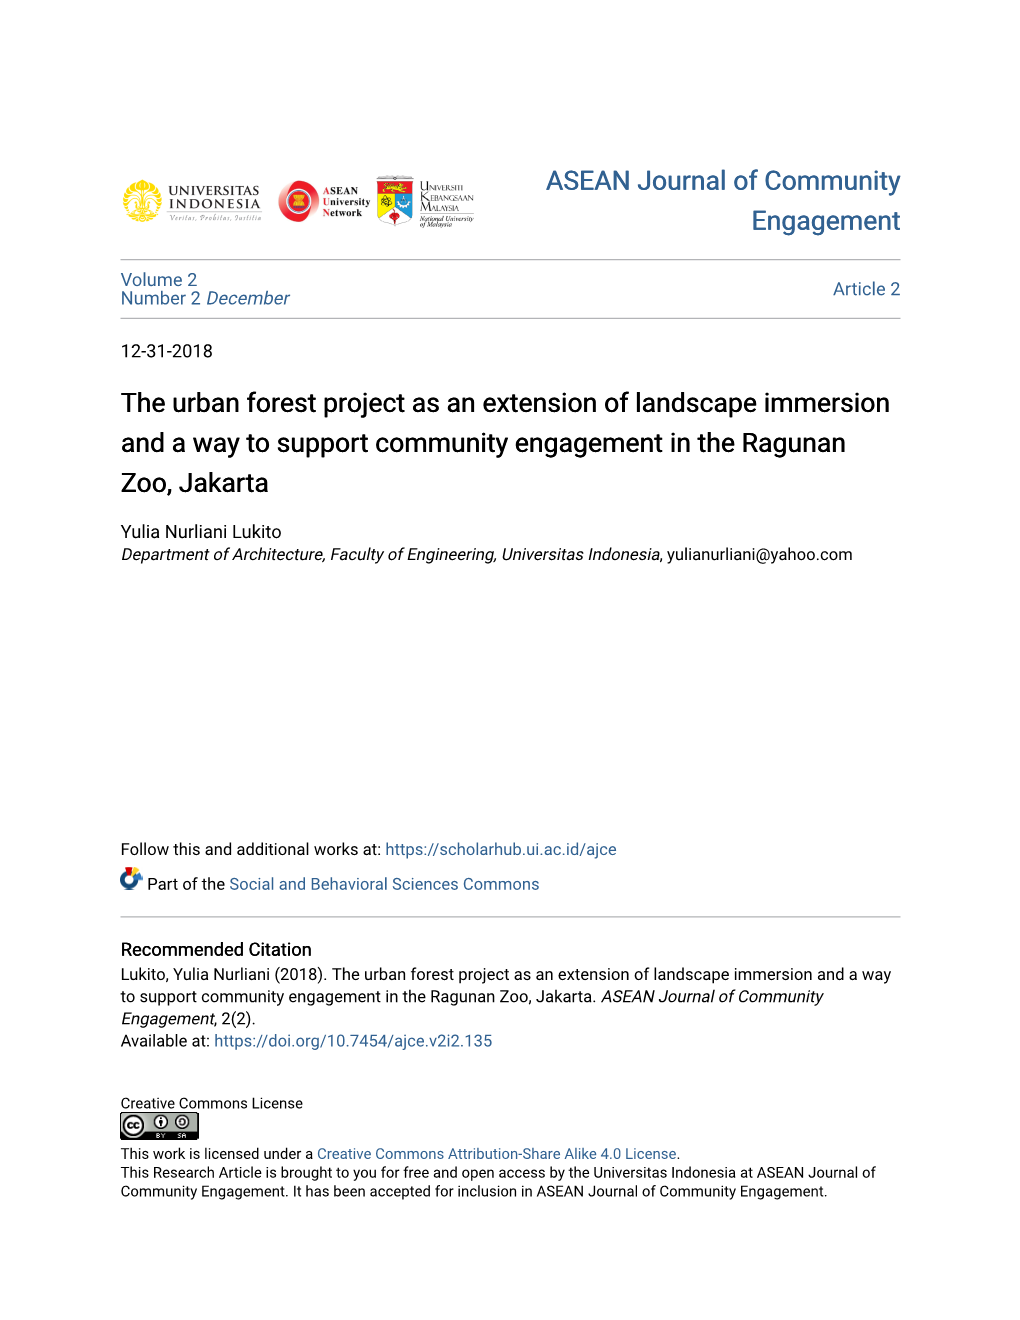 The Urban Forest Project As an Extension of Landscape Immersion and a Way to Support Community Engagement in the Ragunan Zoo, Jakarta